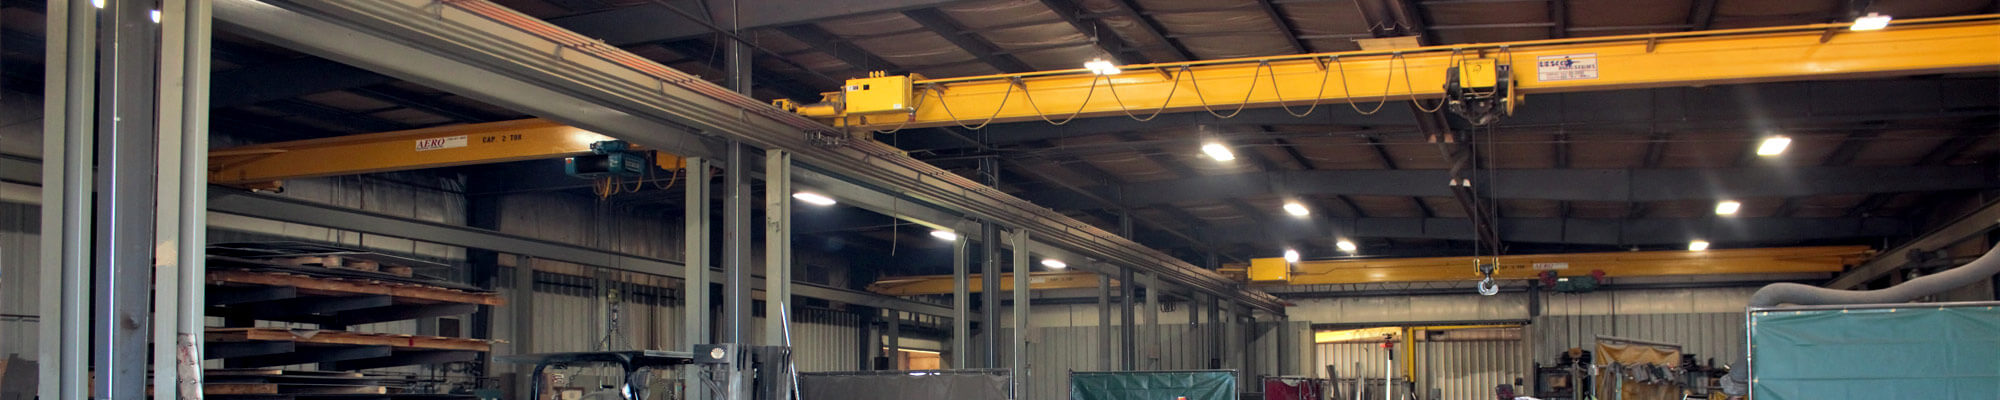 Yellow overhead cranes and manufacturing space inside Lee Industries of Little Falls